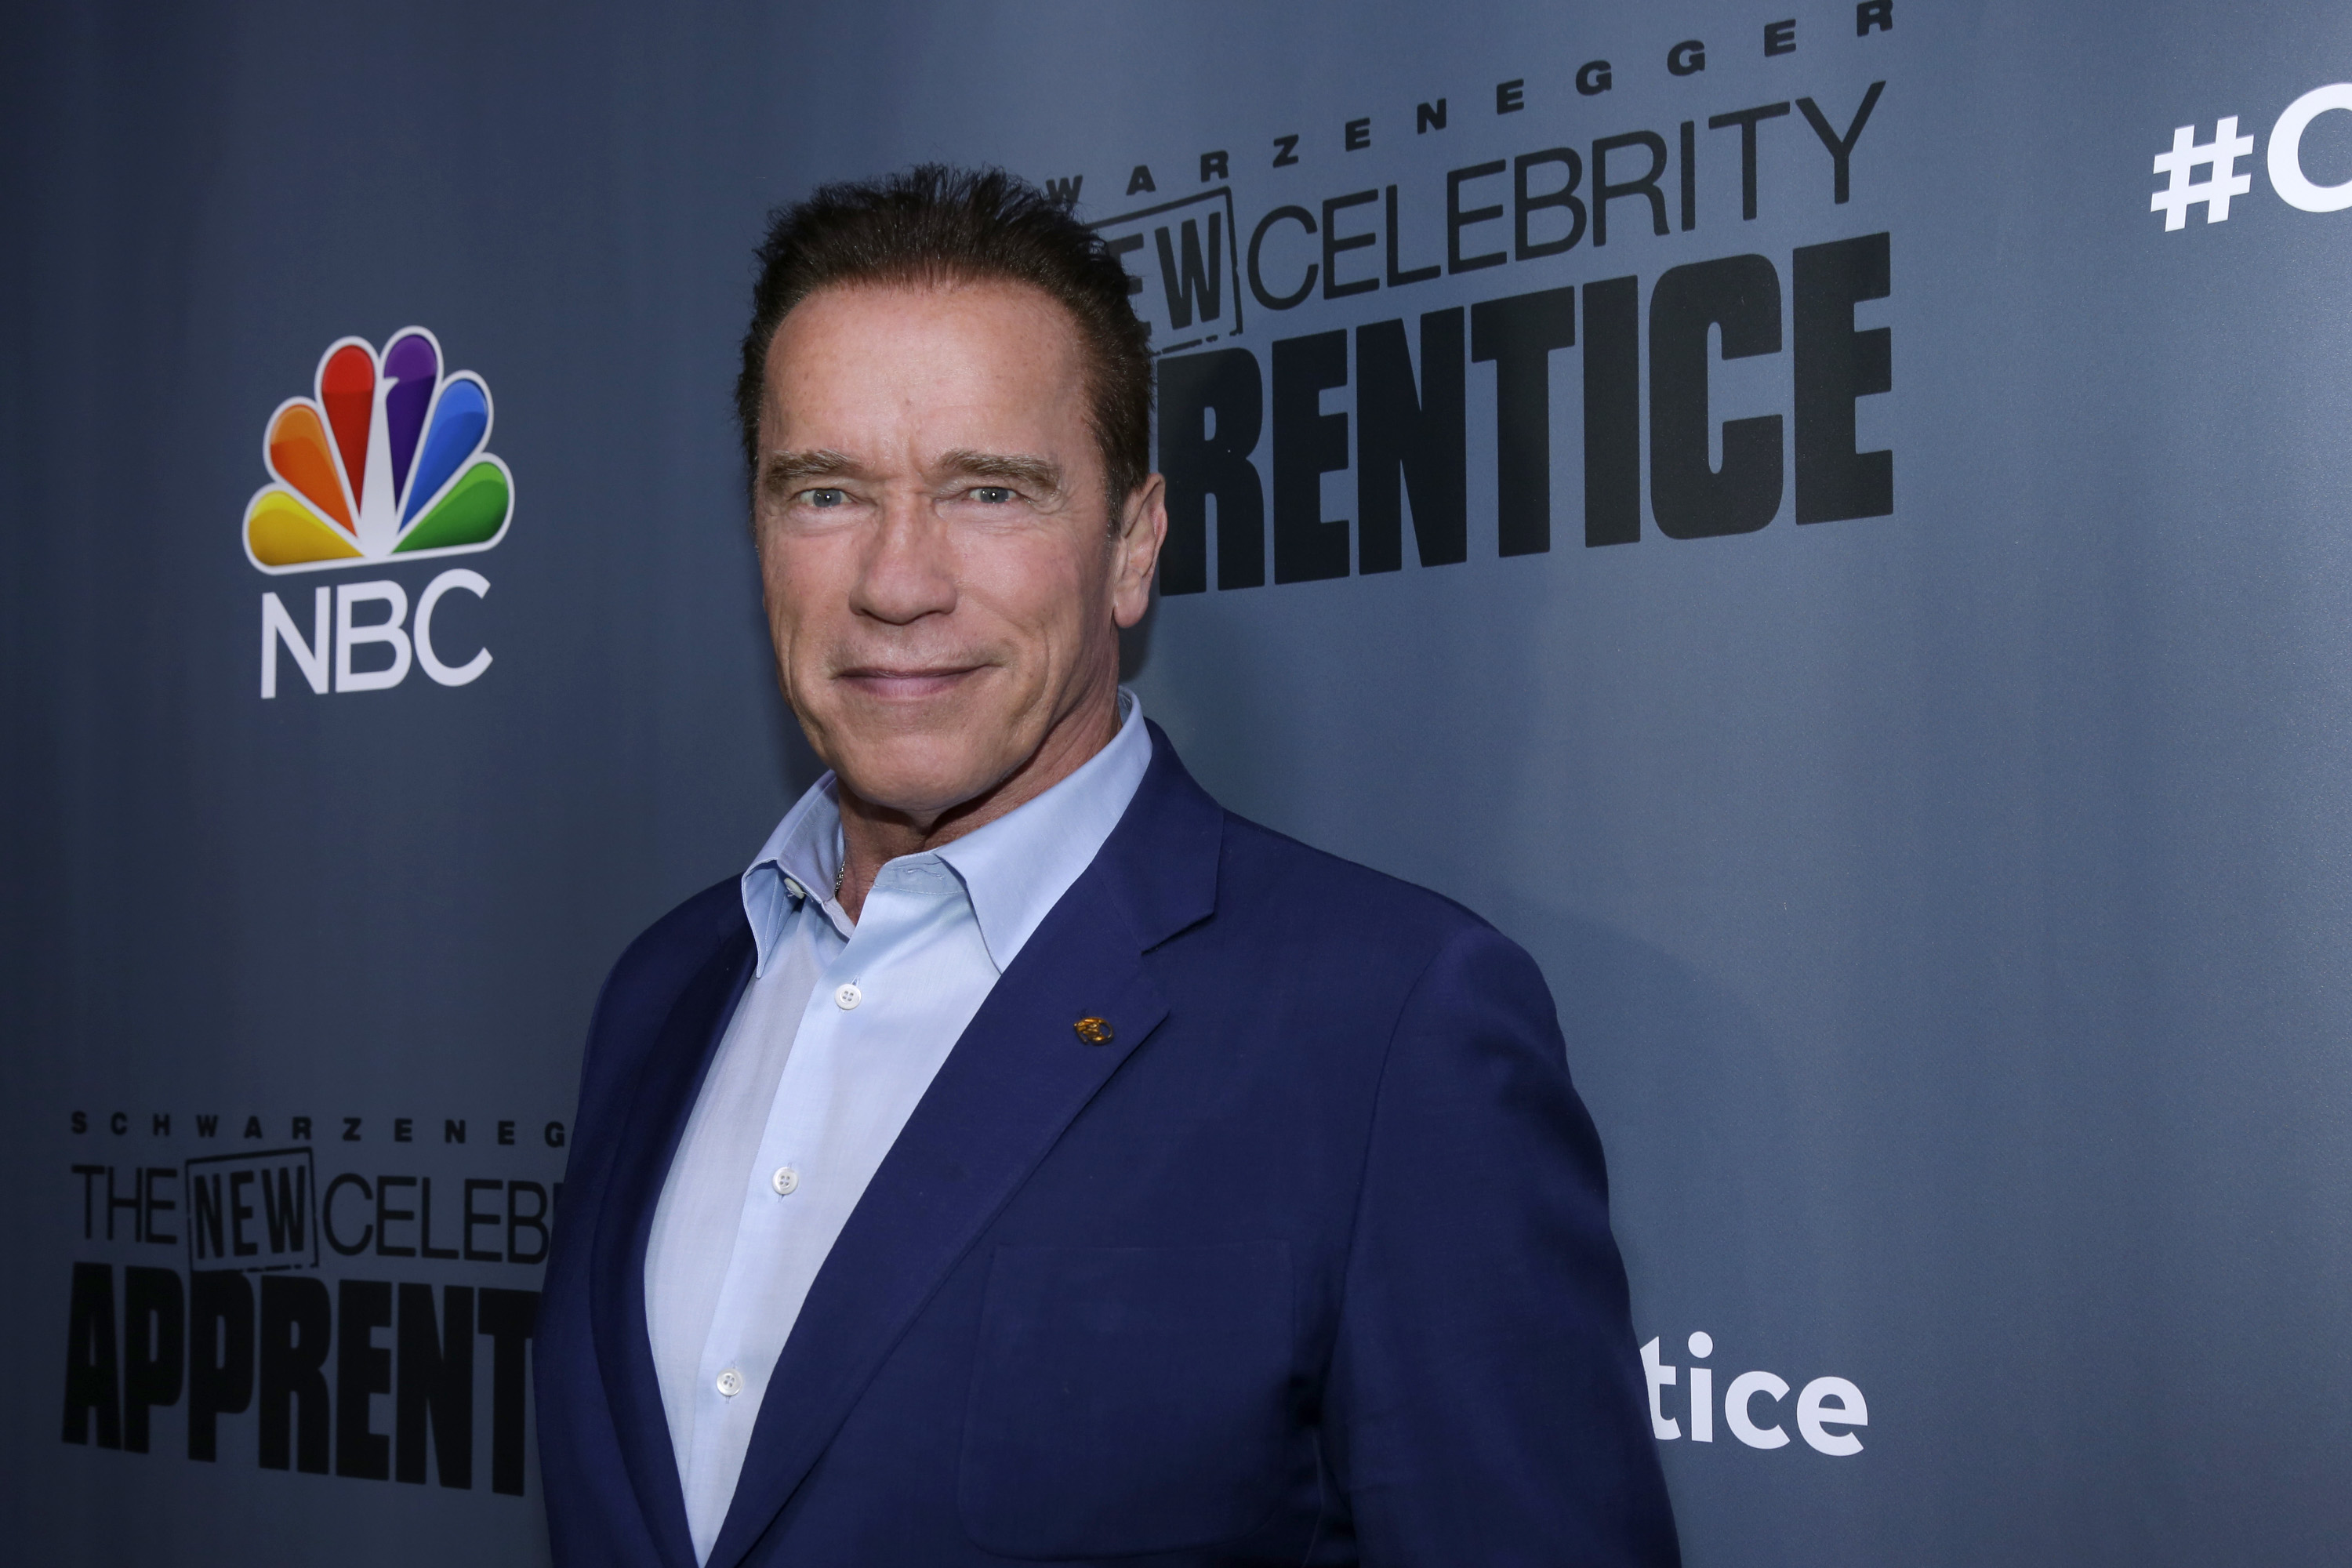 Arnold Schwarzenegger, host of 'The New Celebrity Apprentice' on NBC. (Paul Drinkwater—NBC/NBCU Photo Bank via Getty Images)